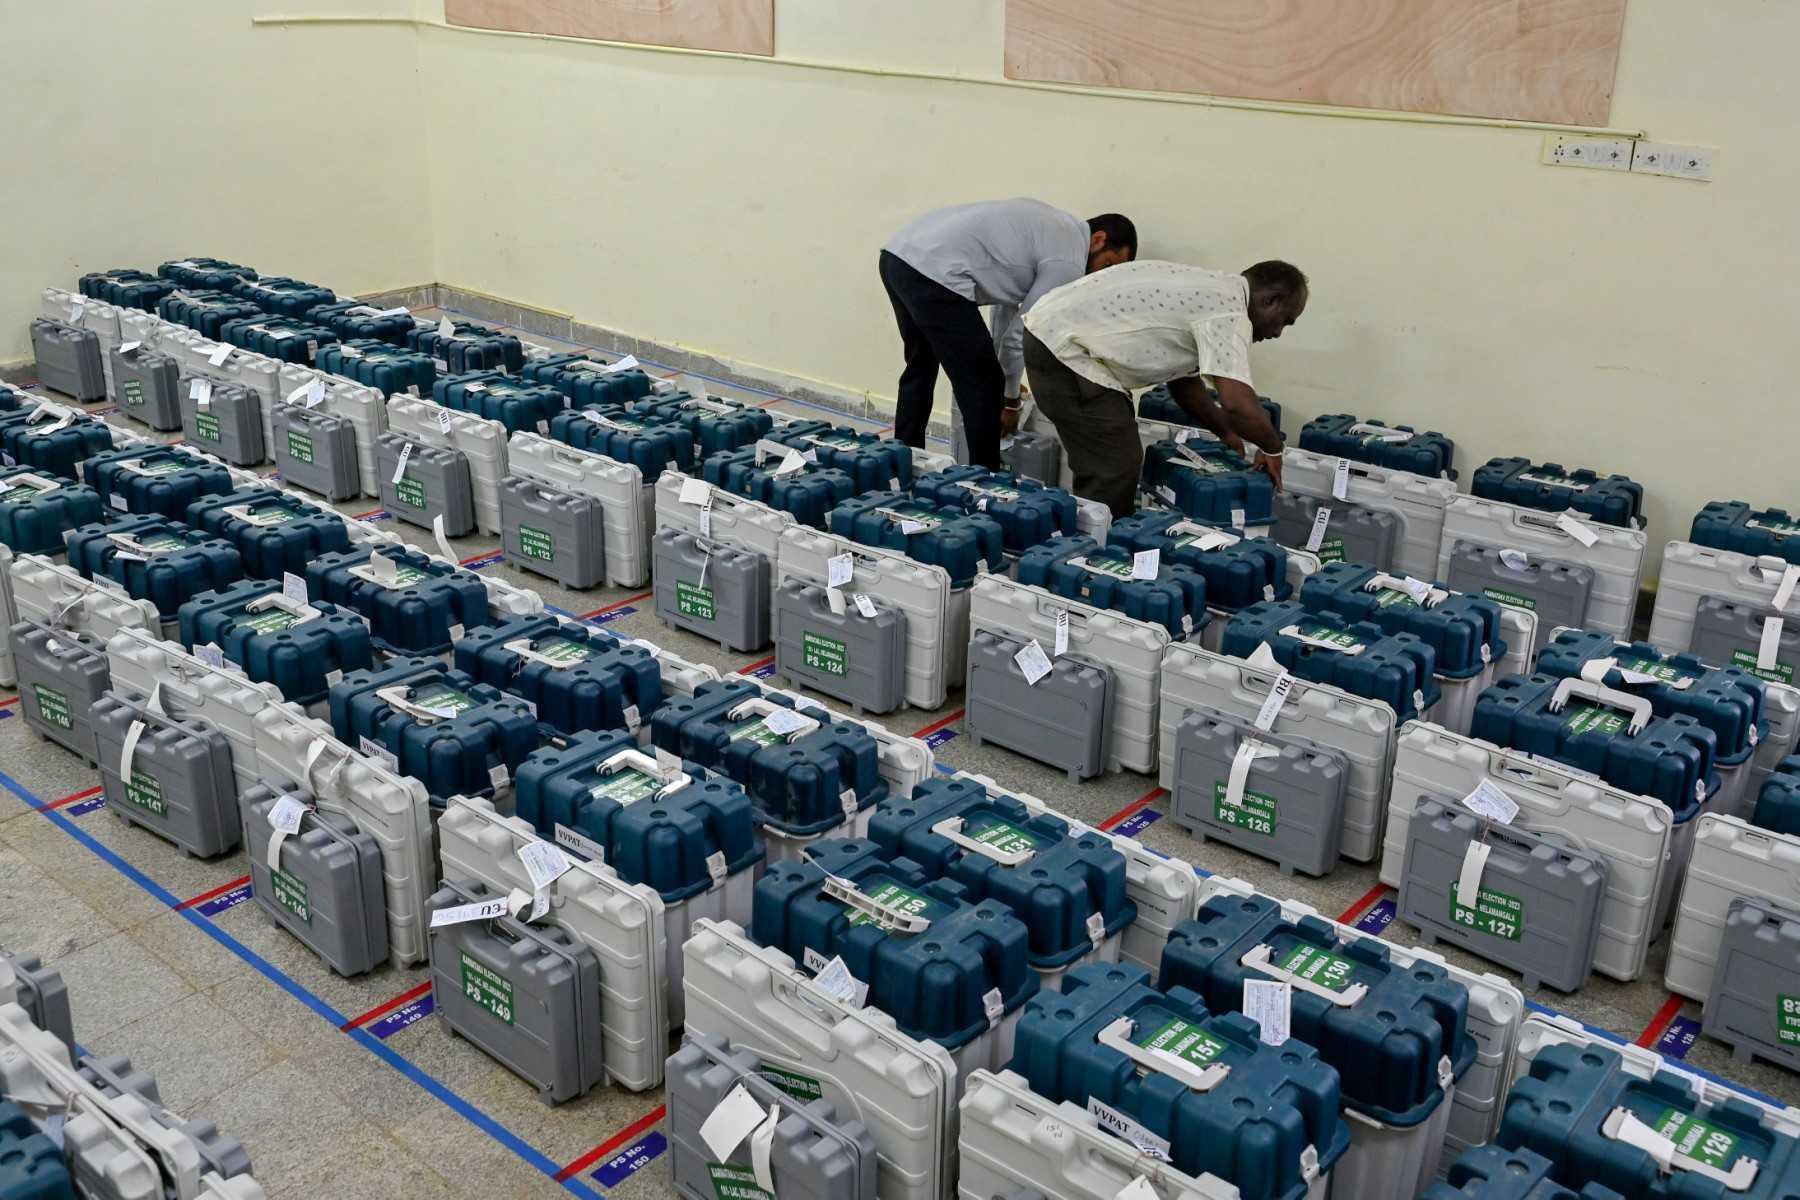 Polling officials collect the electronic voting machines (EVMs) in rural Bengaluru on May 9, on the eve of Karnataka State Legislative Assembly Elections. Photo: AFP 